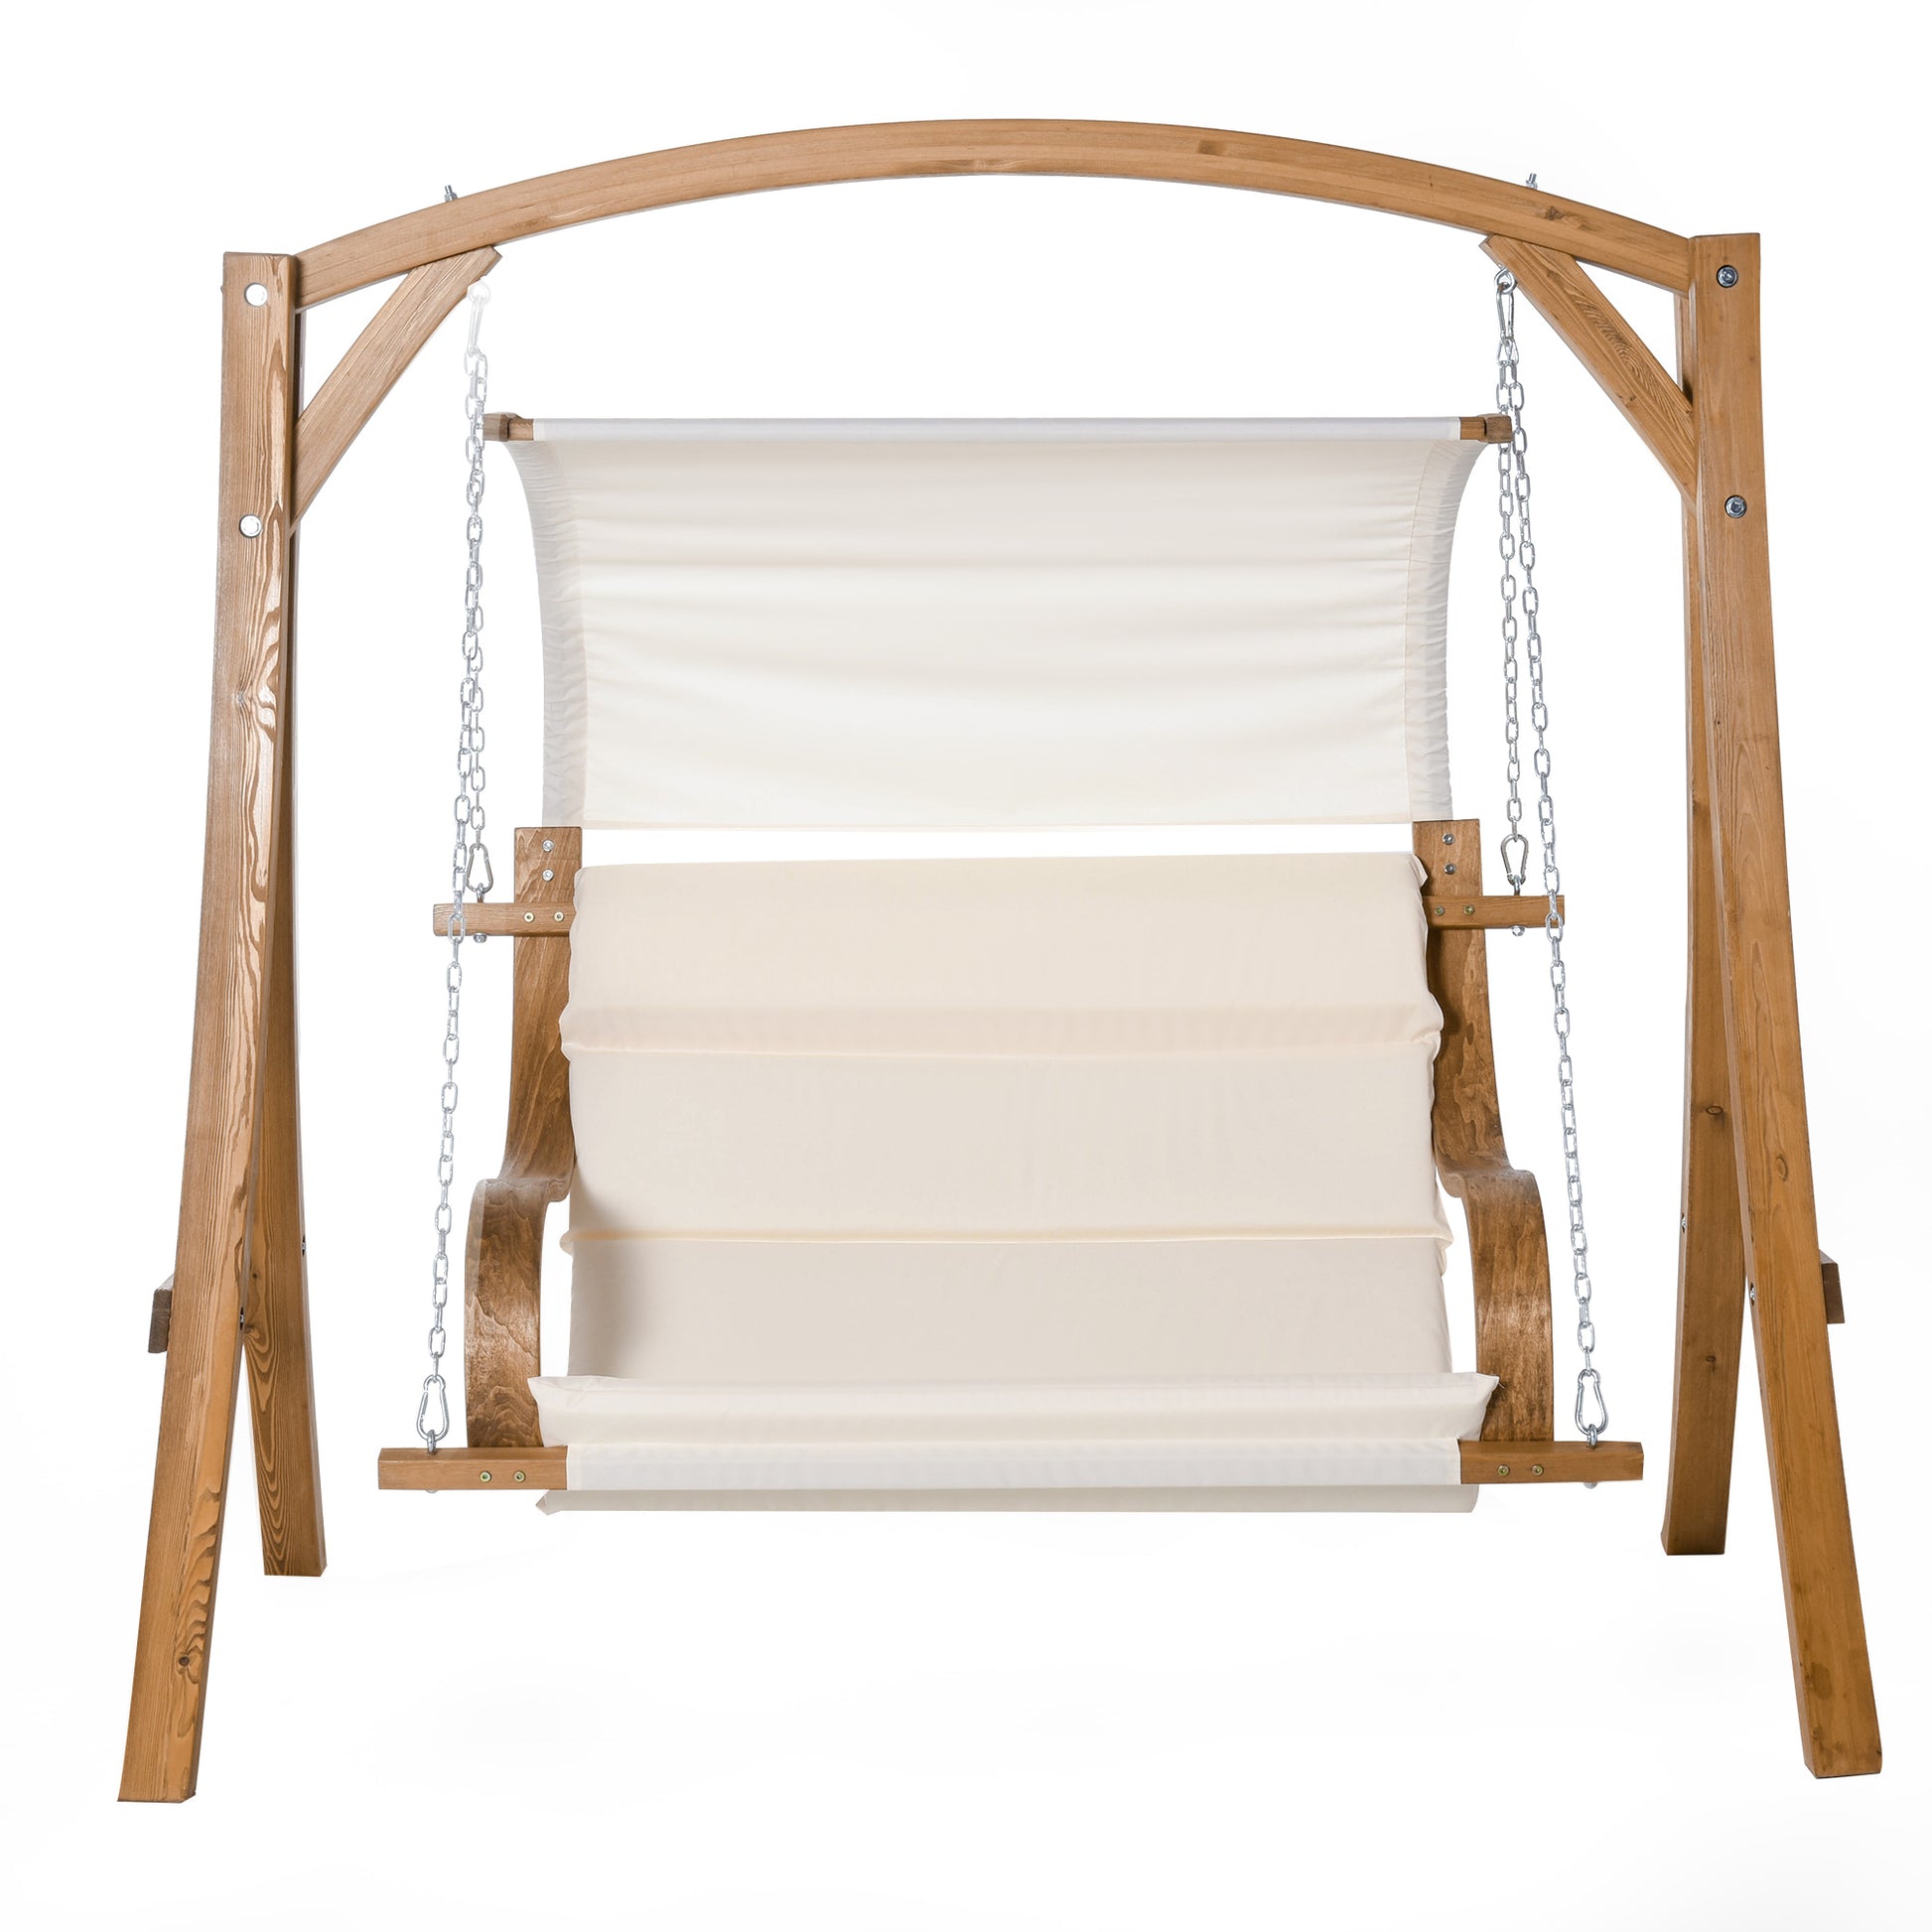 Wooden Porch Swing Chair A-Frame Wood Log Swing Bench Chair With Canopy and Cushion for Patio Garden Yard - Gallery Canada